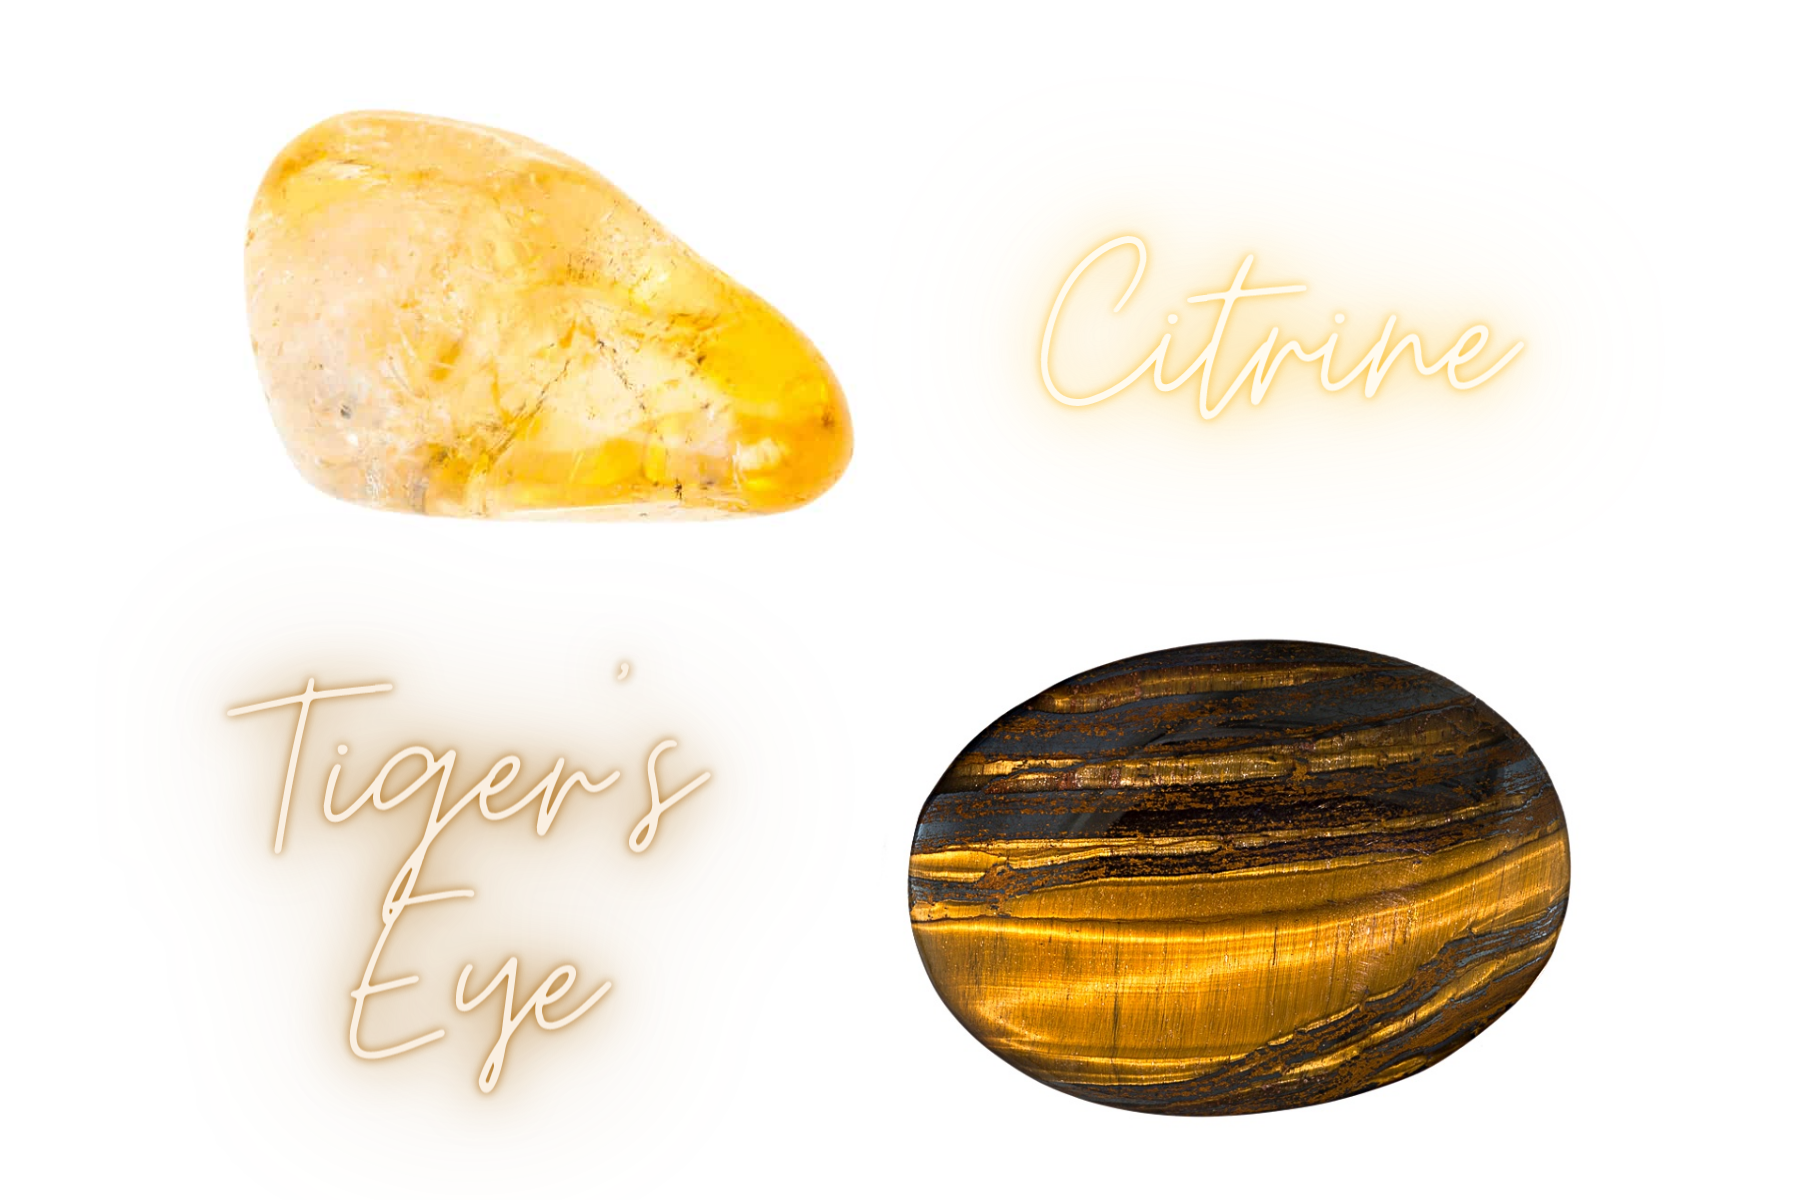 Citrine and Tiger's eye crystals